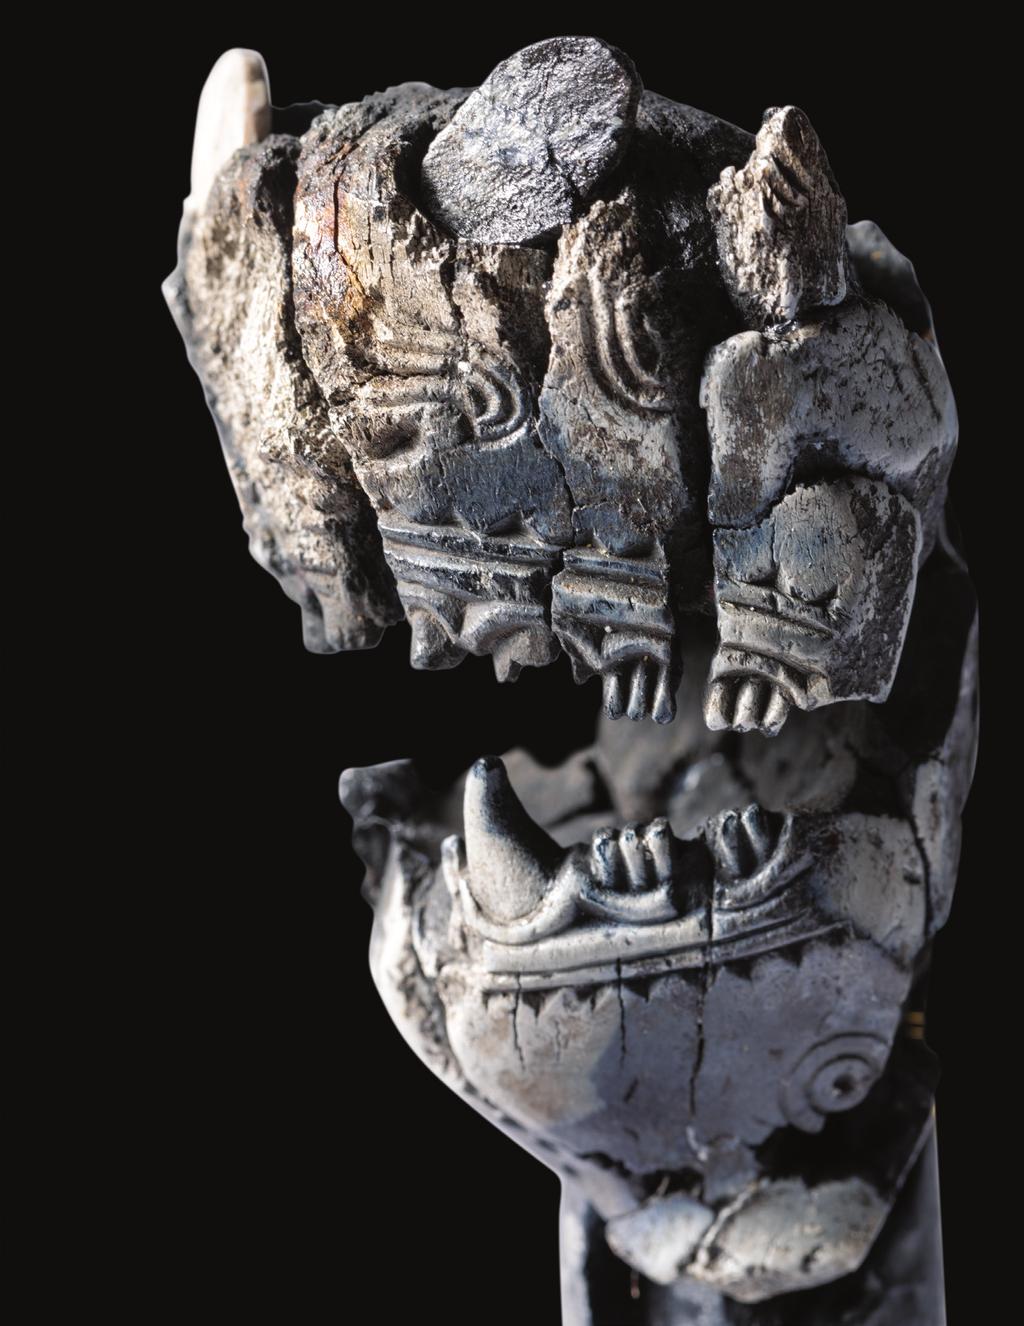 This figure head, found in a female grave from the 10th century, was